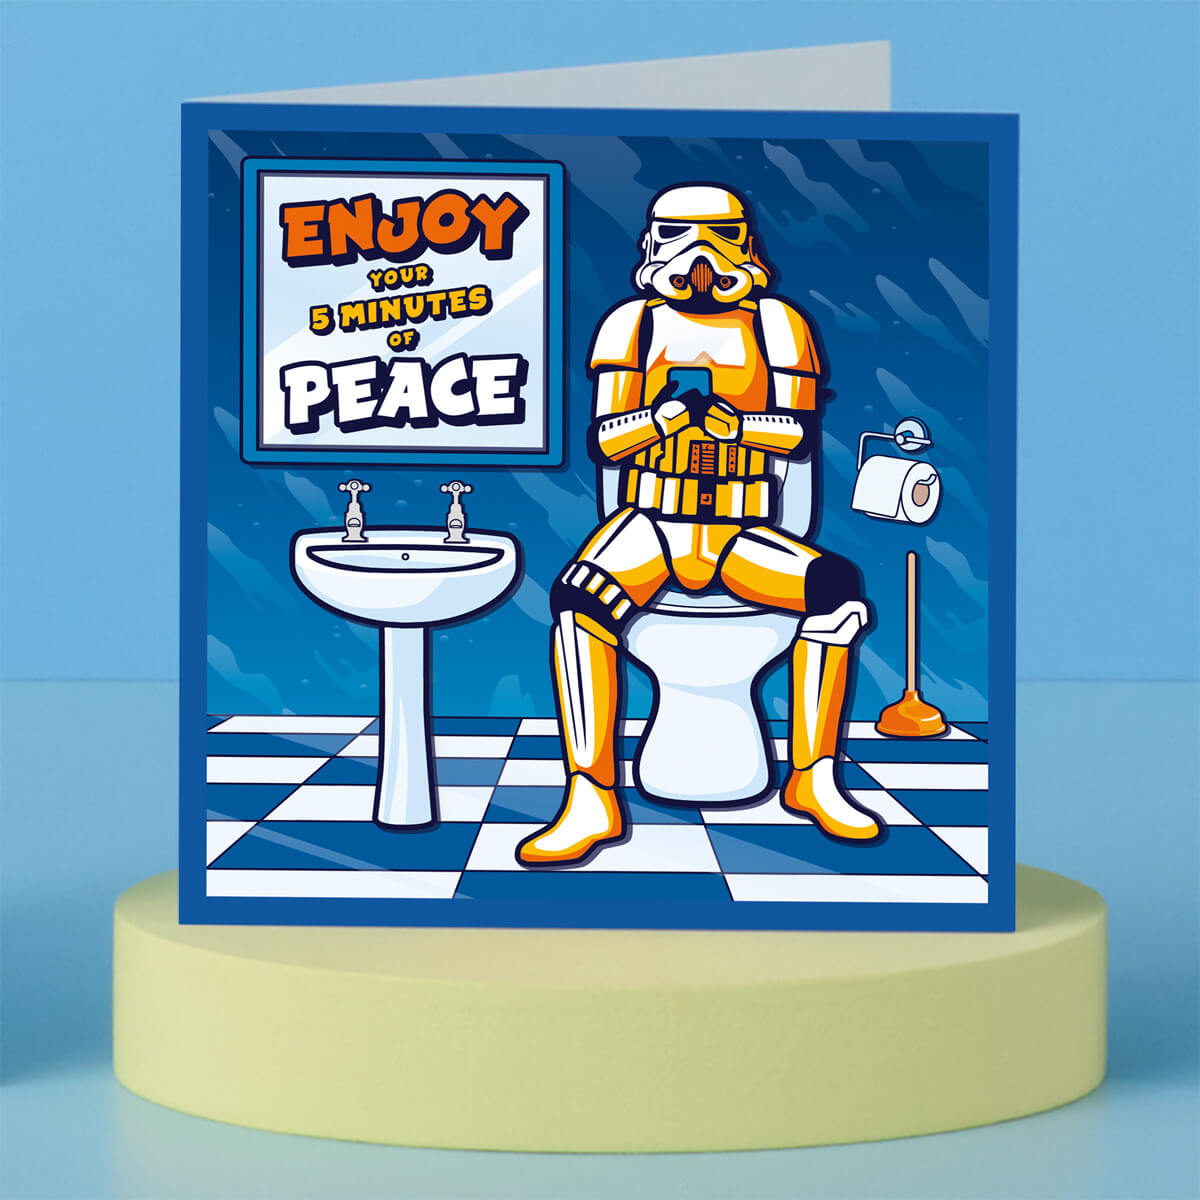 Original Stormtrooper Greeting Card which shows a Stormtrooper sitting on the toilet with 'Enjoy Your 5 minutes of peace' written on the mirror - officially licensed and produced by Cardology